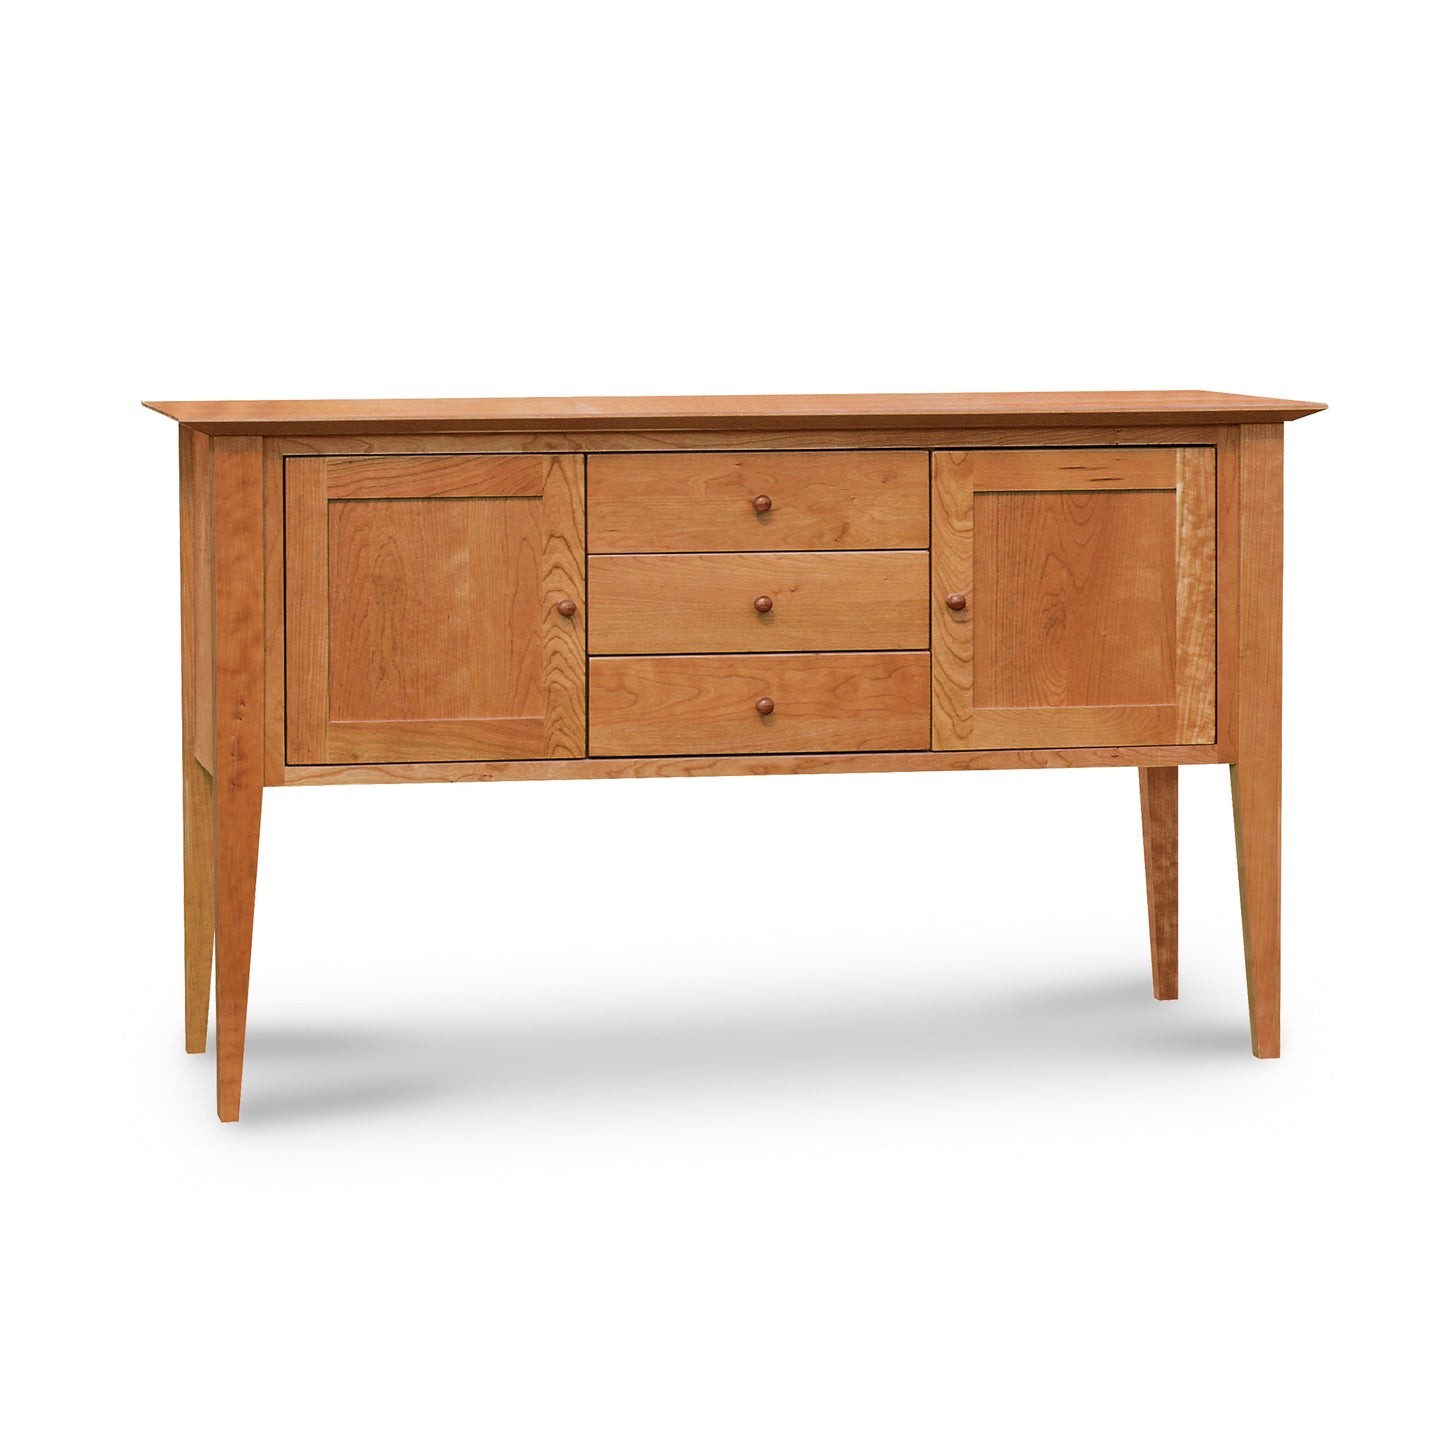 A Lyndon Furniture Classic Shaker Small Buffet with two drawers and solid wood construction.